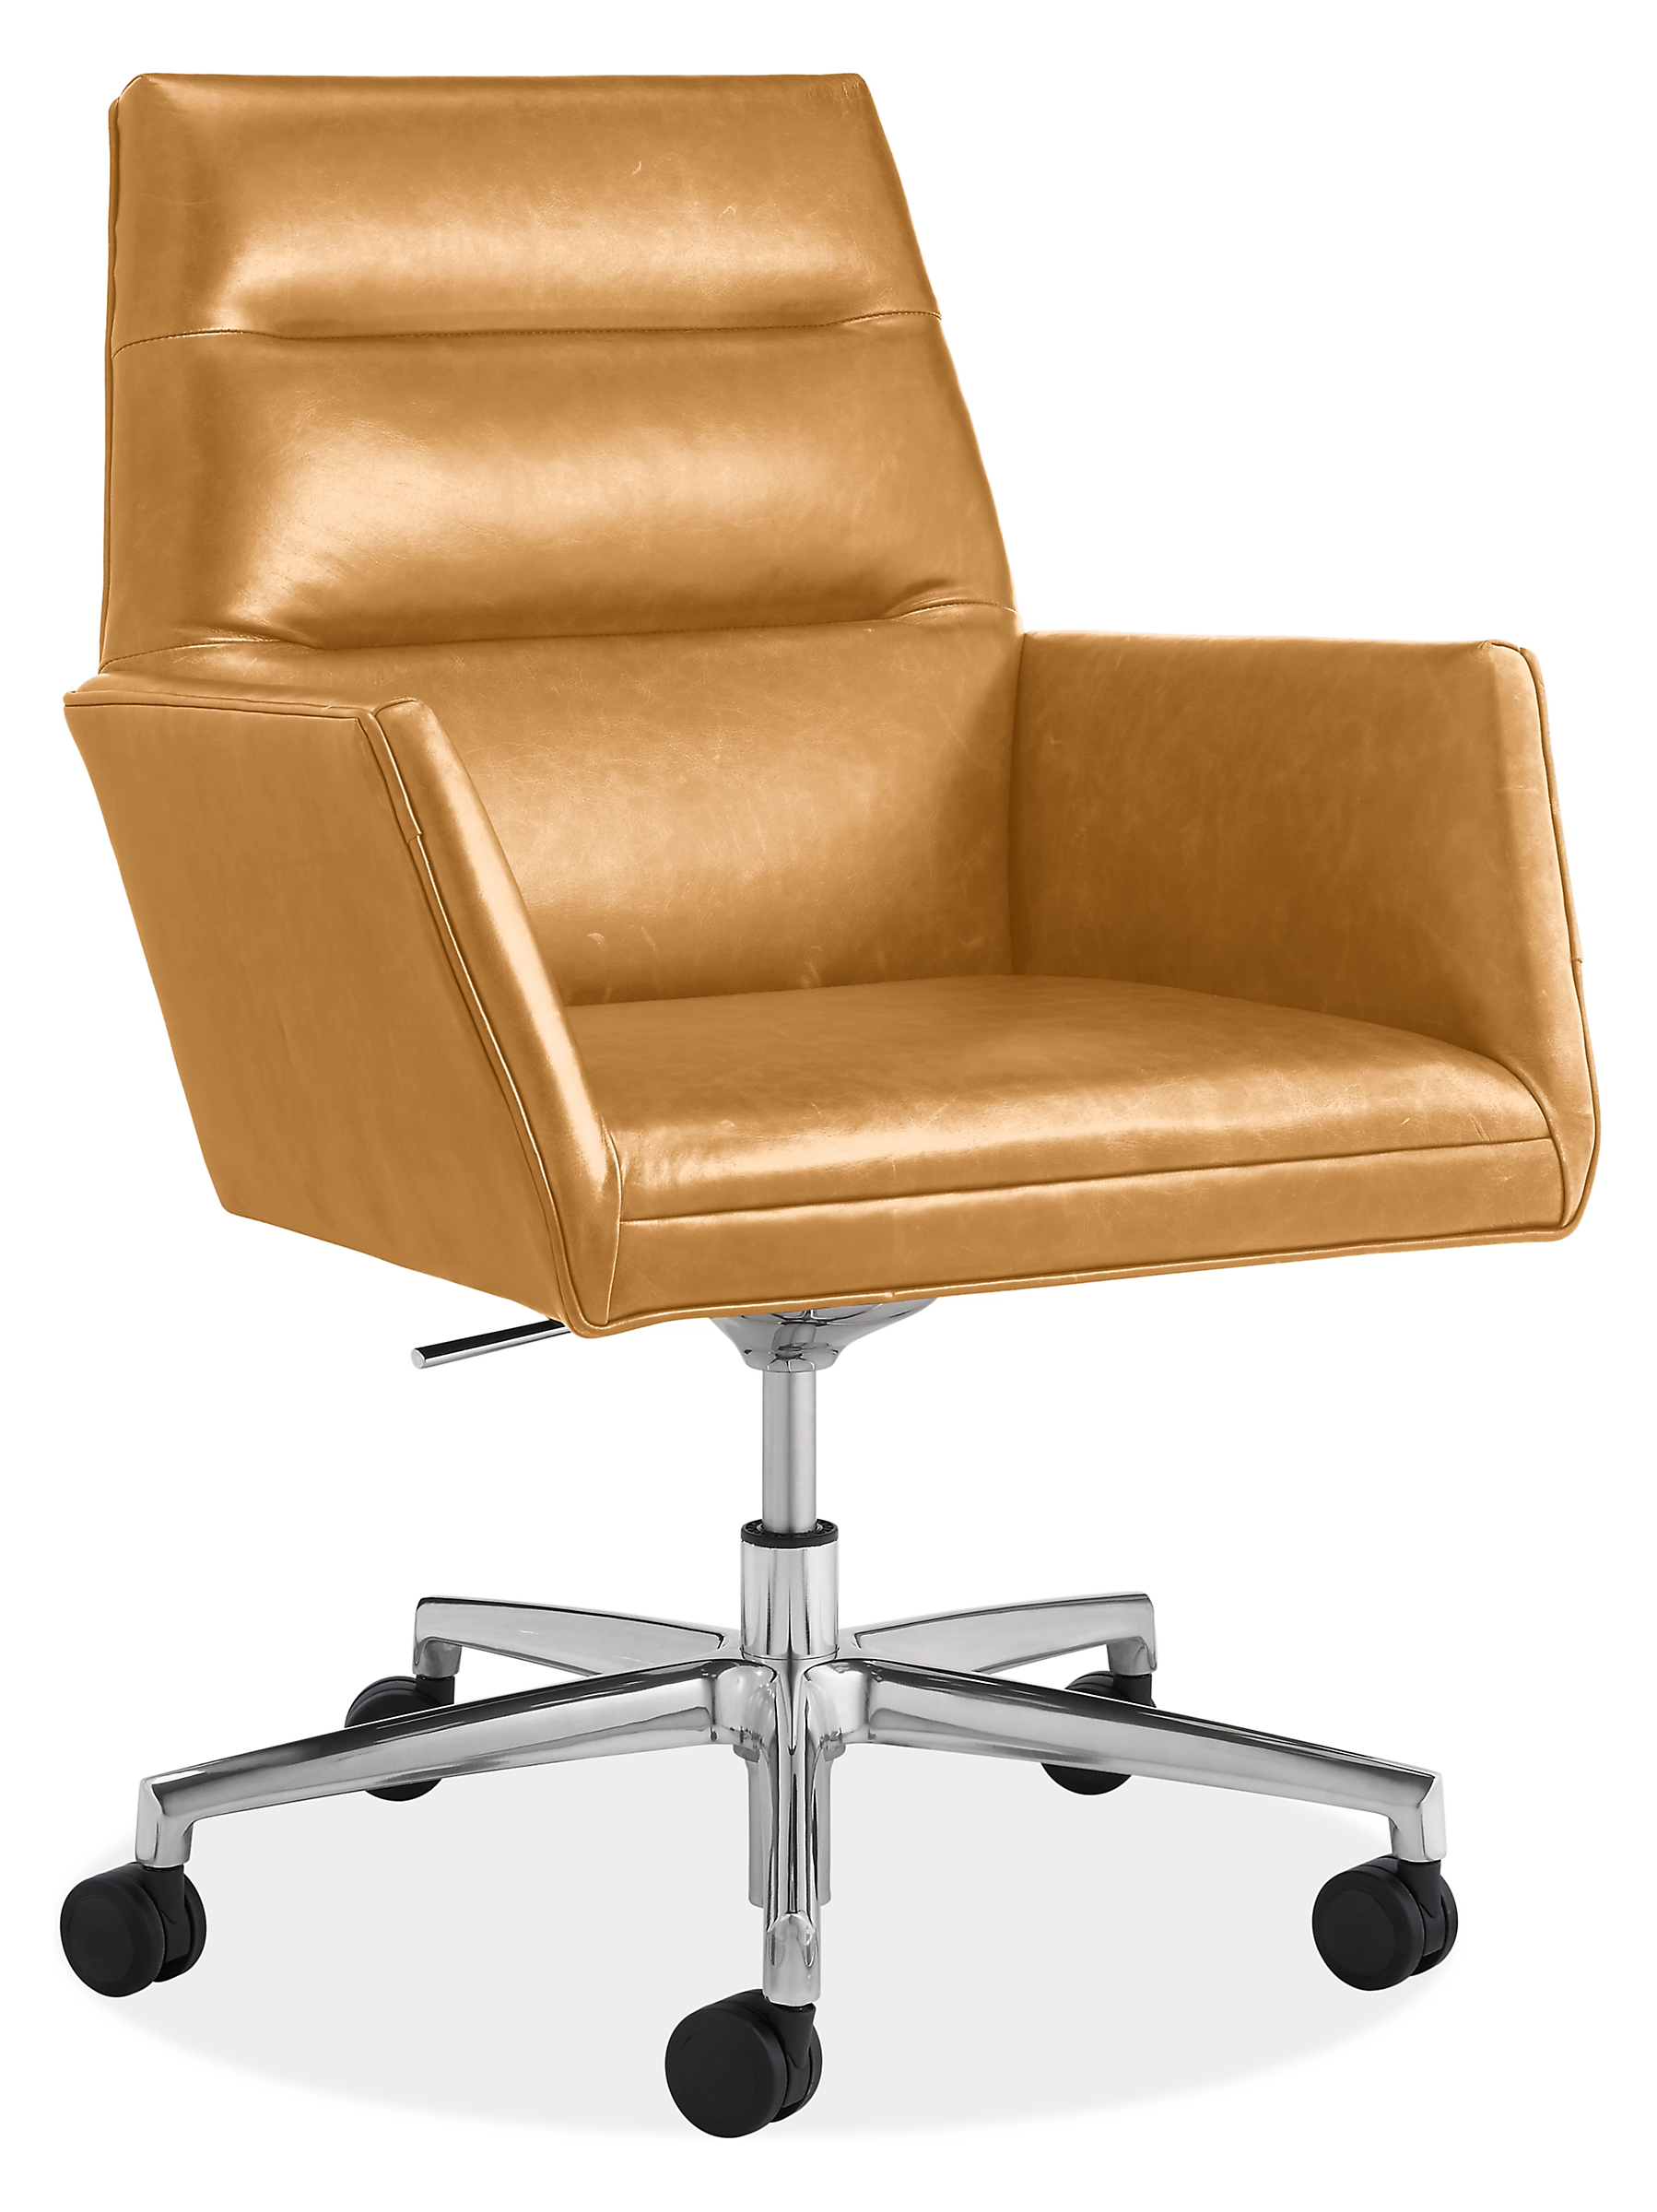 Tenley Office Chair in Cyrus Camel Leather